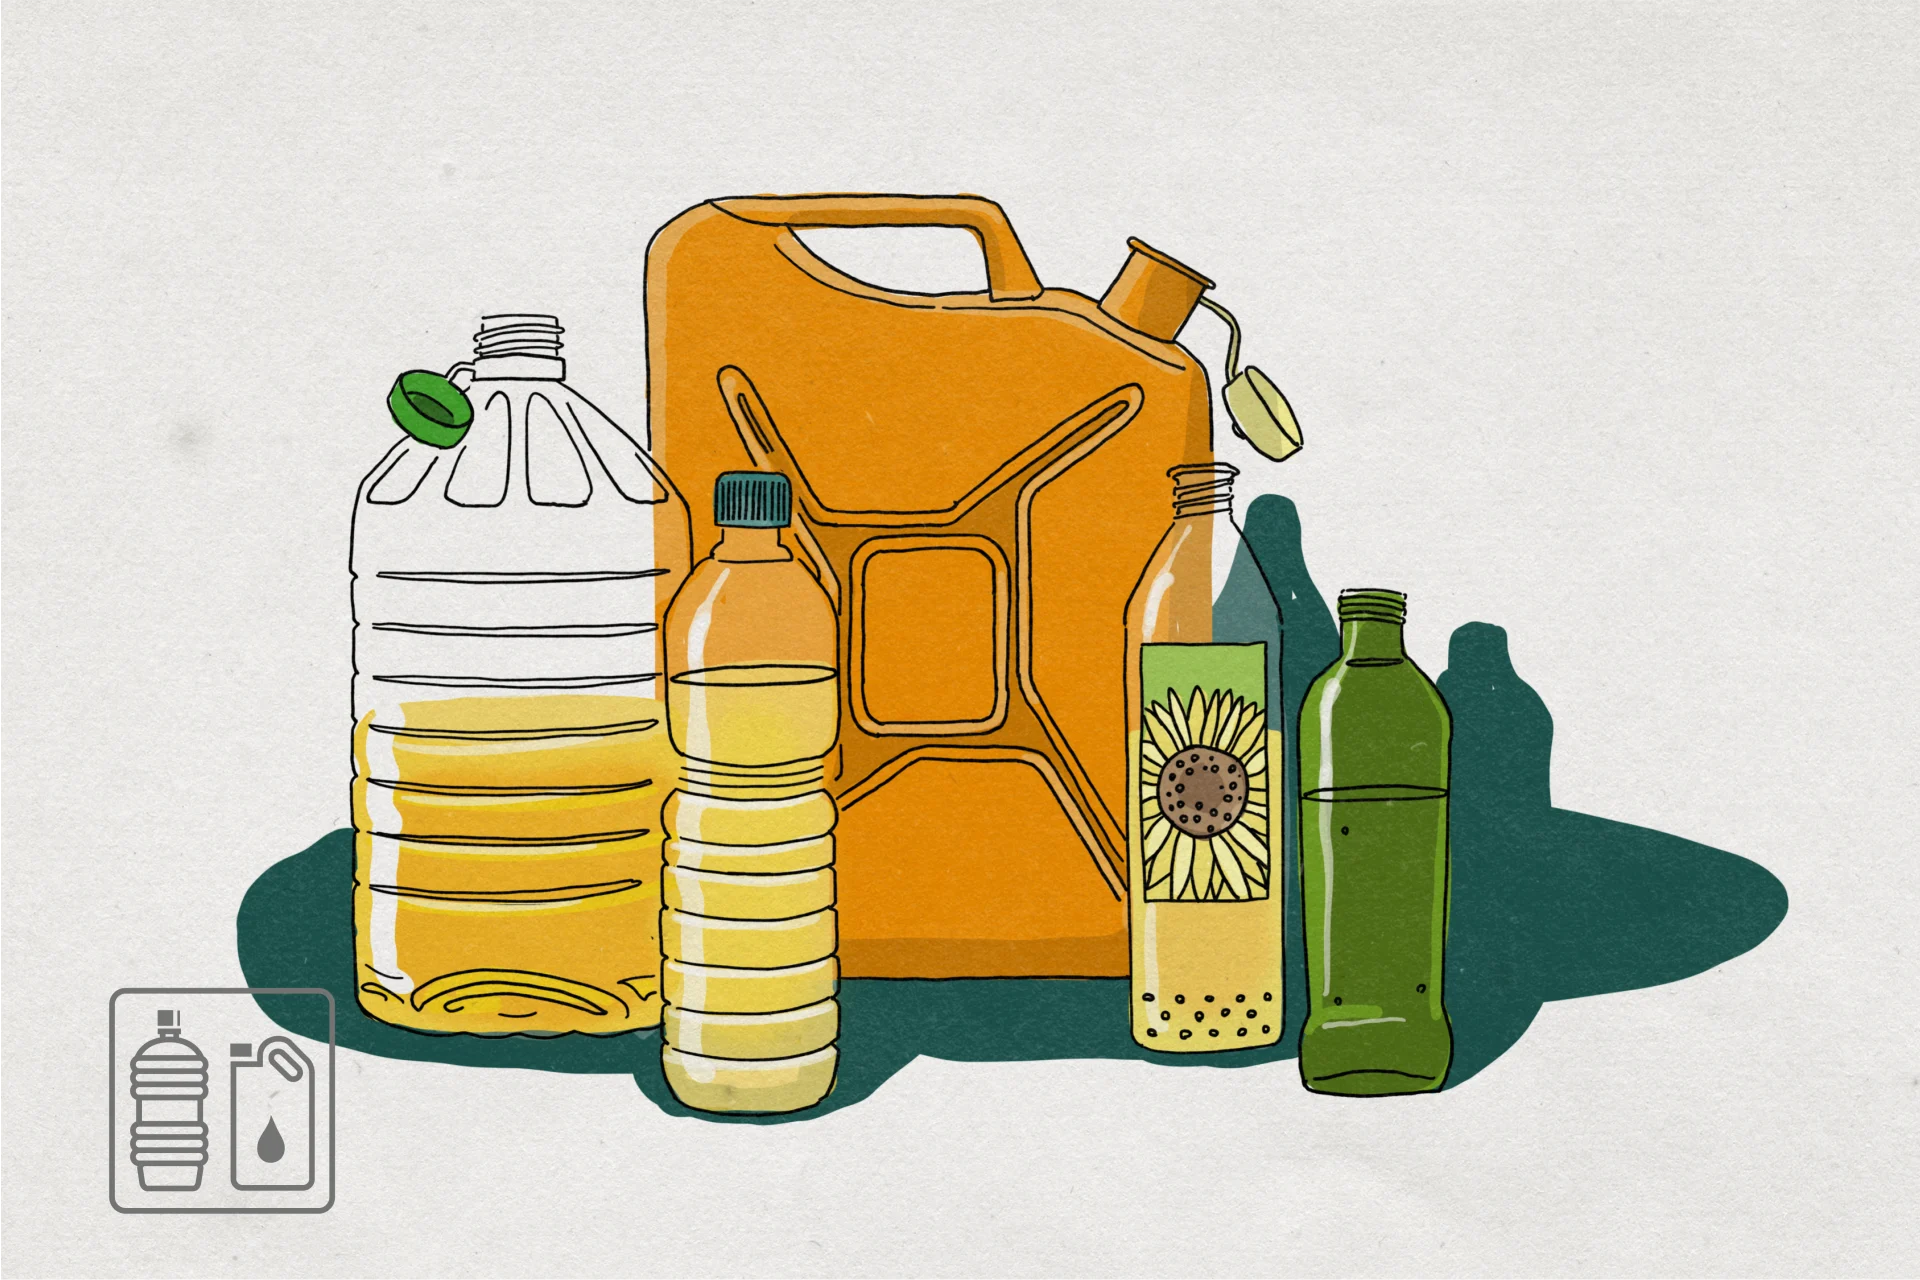 Illustration of half-empty packaging for cooking oil and engine oil.